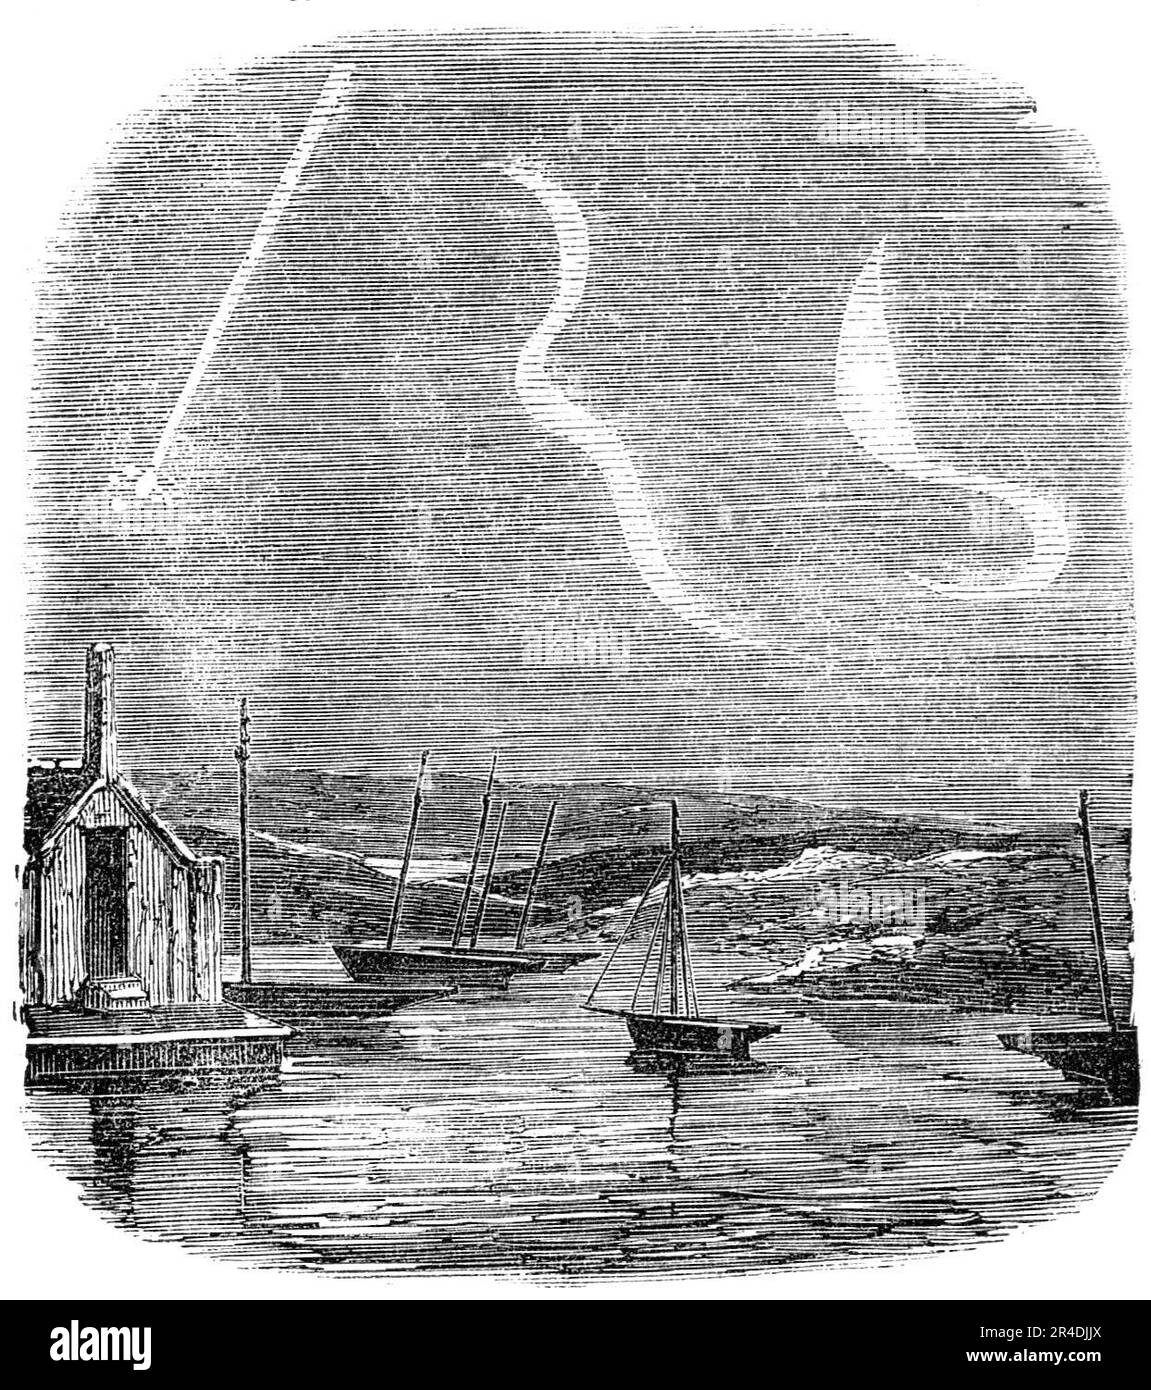 The Meteor, as seen over the Medina, Isle of Wight, 1856. 'At 4.50 p.m., as I was looking to the southward from East Cowes, I observed a ball of fire descend vertically, S.S.W. by compass, which seemed to have shot forth from the heavens from an altitude of sixty degrees, and descended in a straight line and burst at an elevation of about twenty or twenty-five degrees, presenting the most brilliant colours, from bright silvery white to deep yellow - then red and blue, in every respect similar to a sky-rocket. The train which it left behind appeared about fifteen degrees or more in length, like Stock Photo